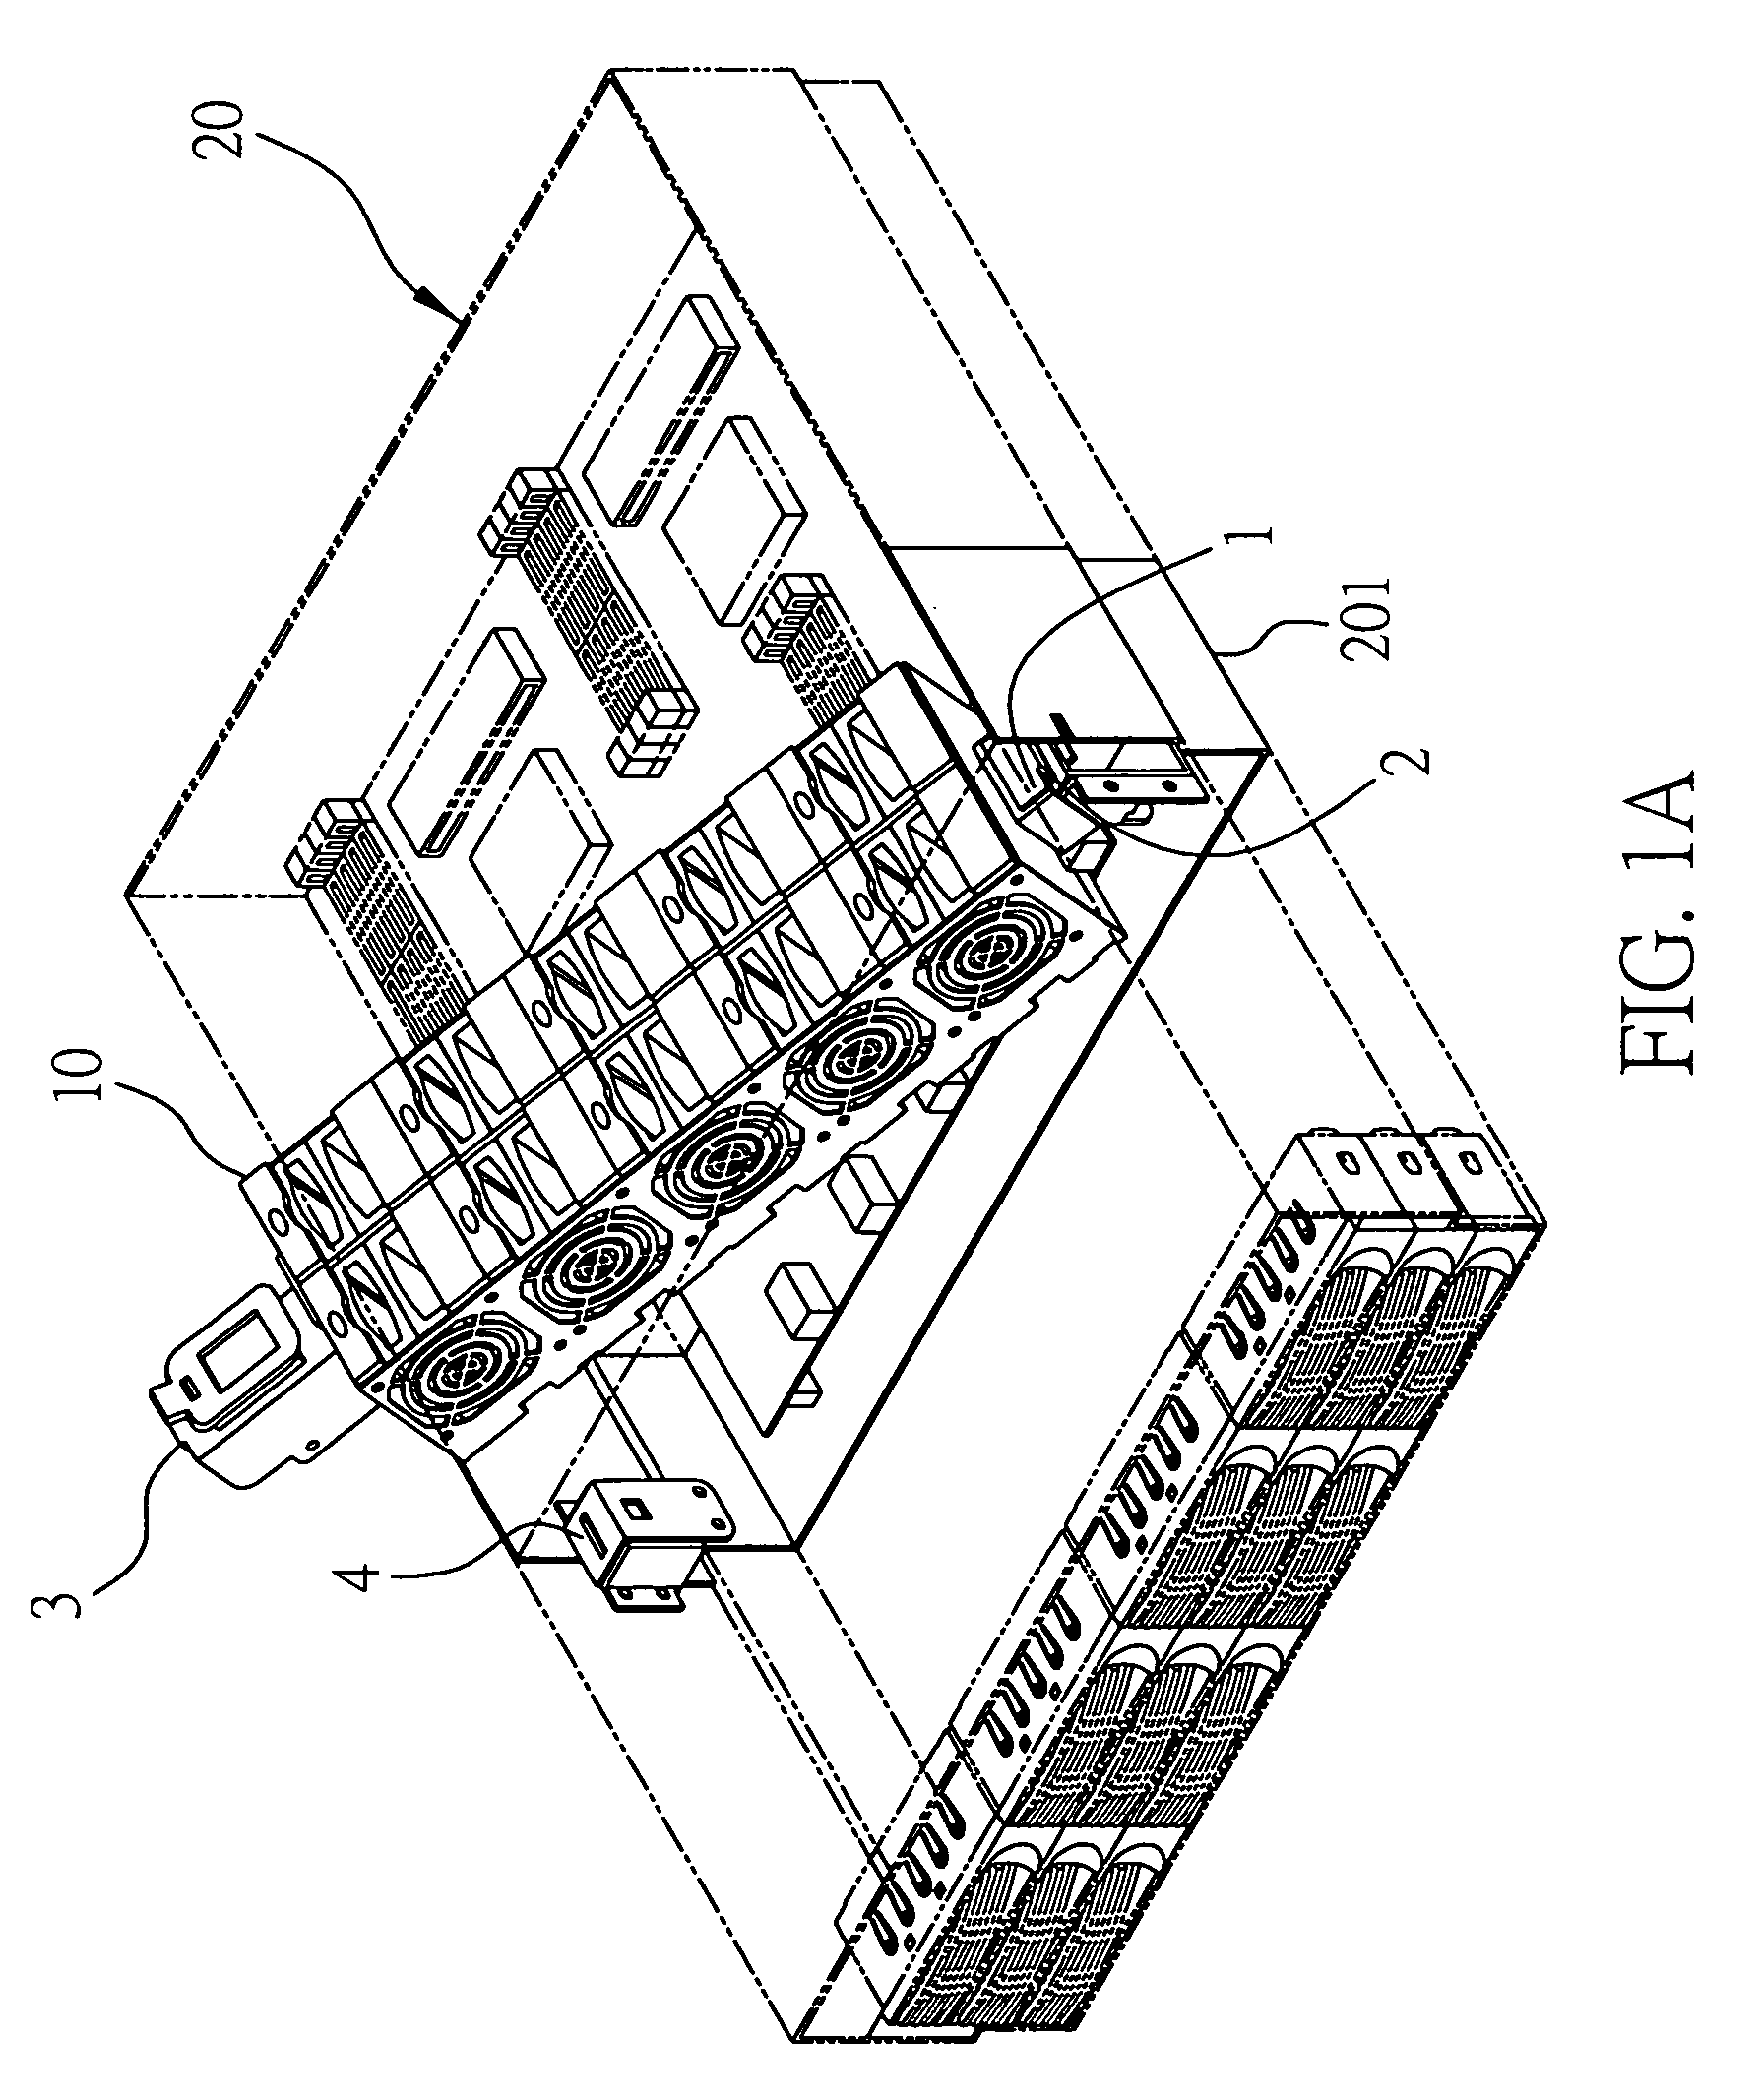 Fan rack fixture having two pairs of positioning and locking portions